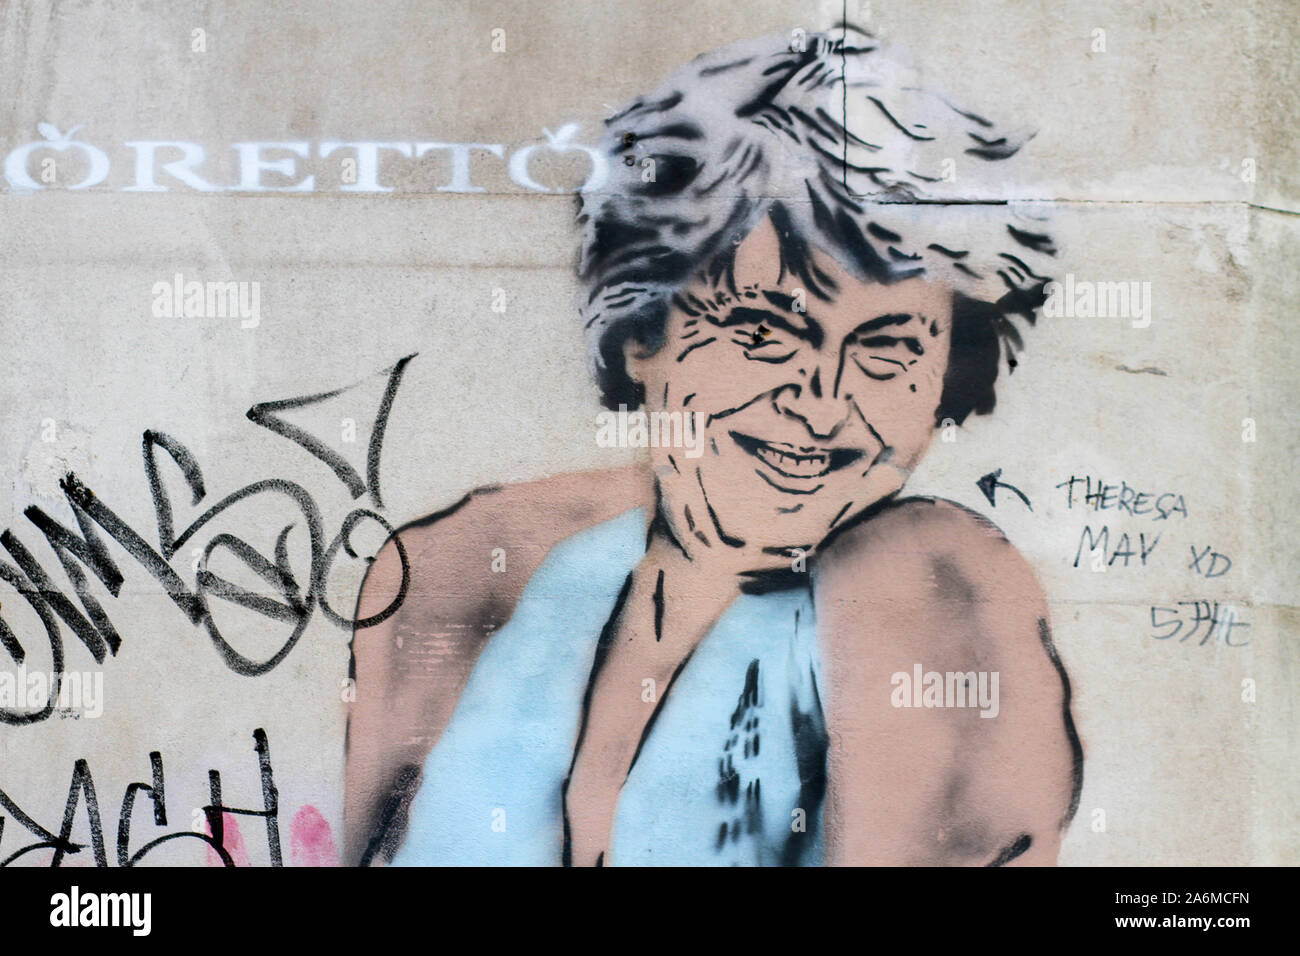 Theresa May as Marilyn Monroe - - graffiti artwork by Loretto in 2018 in London Stock Photo